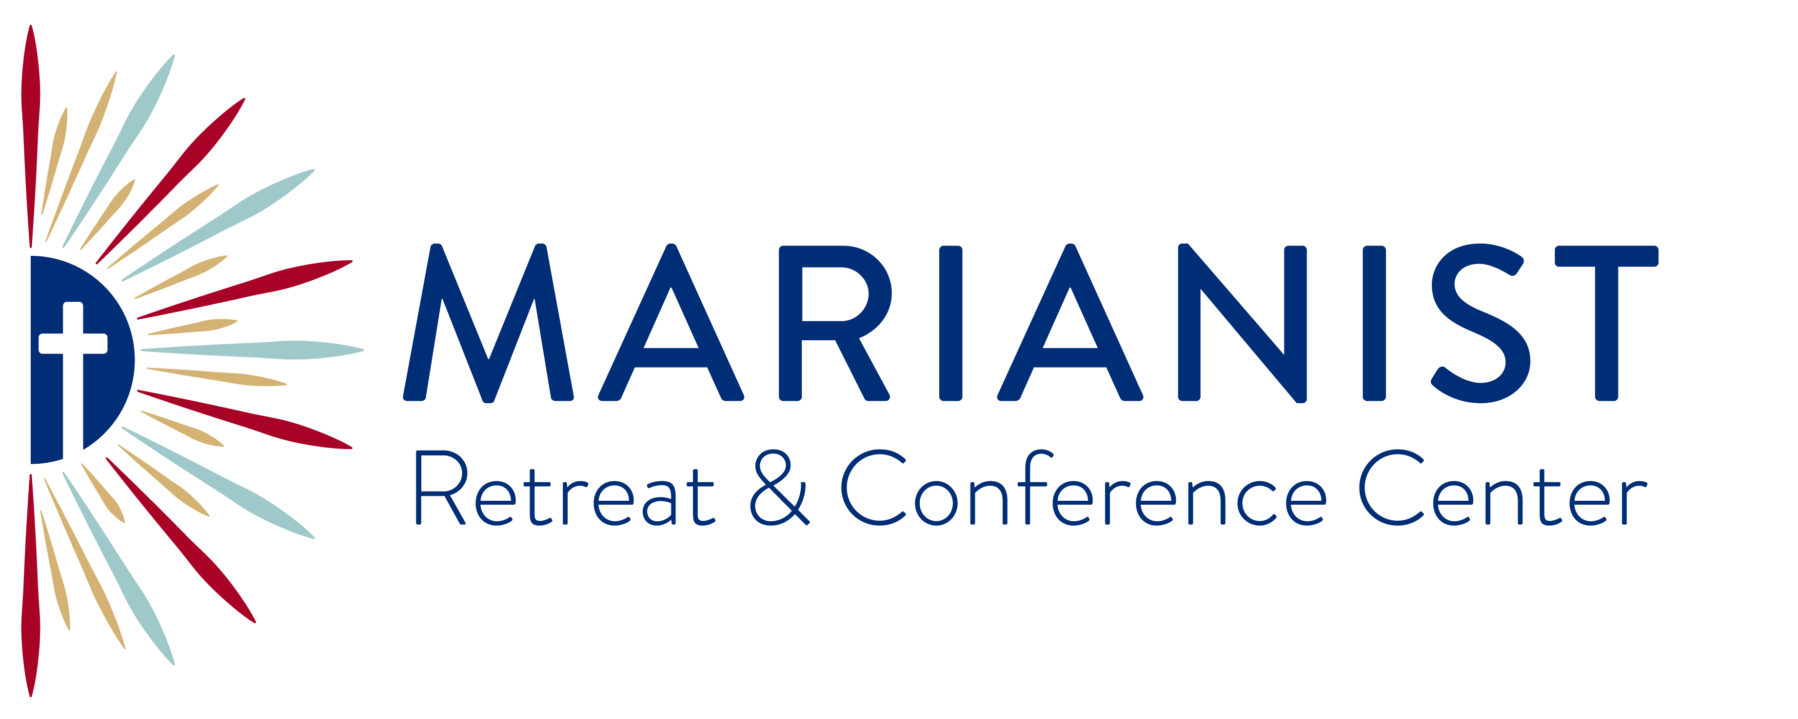 Marianist Retreat & Conference Center